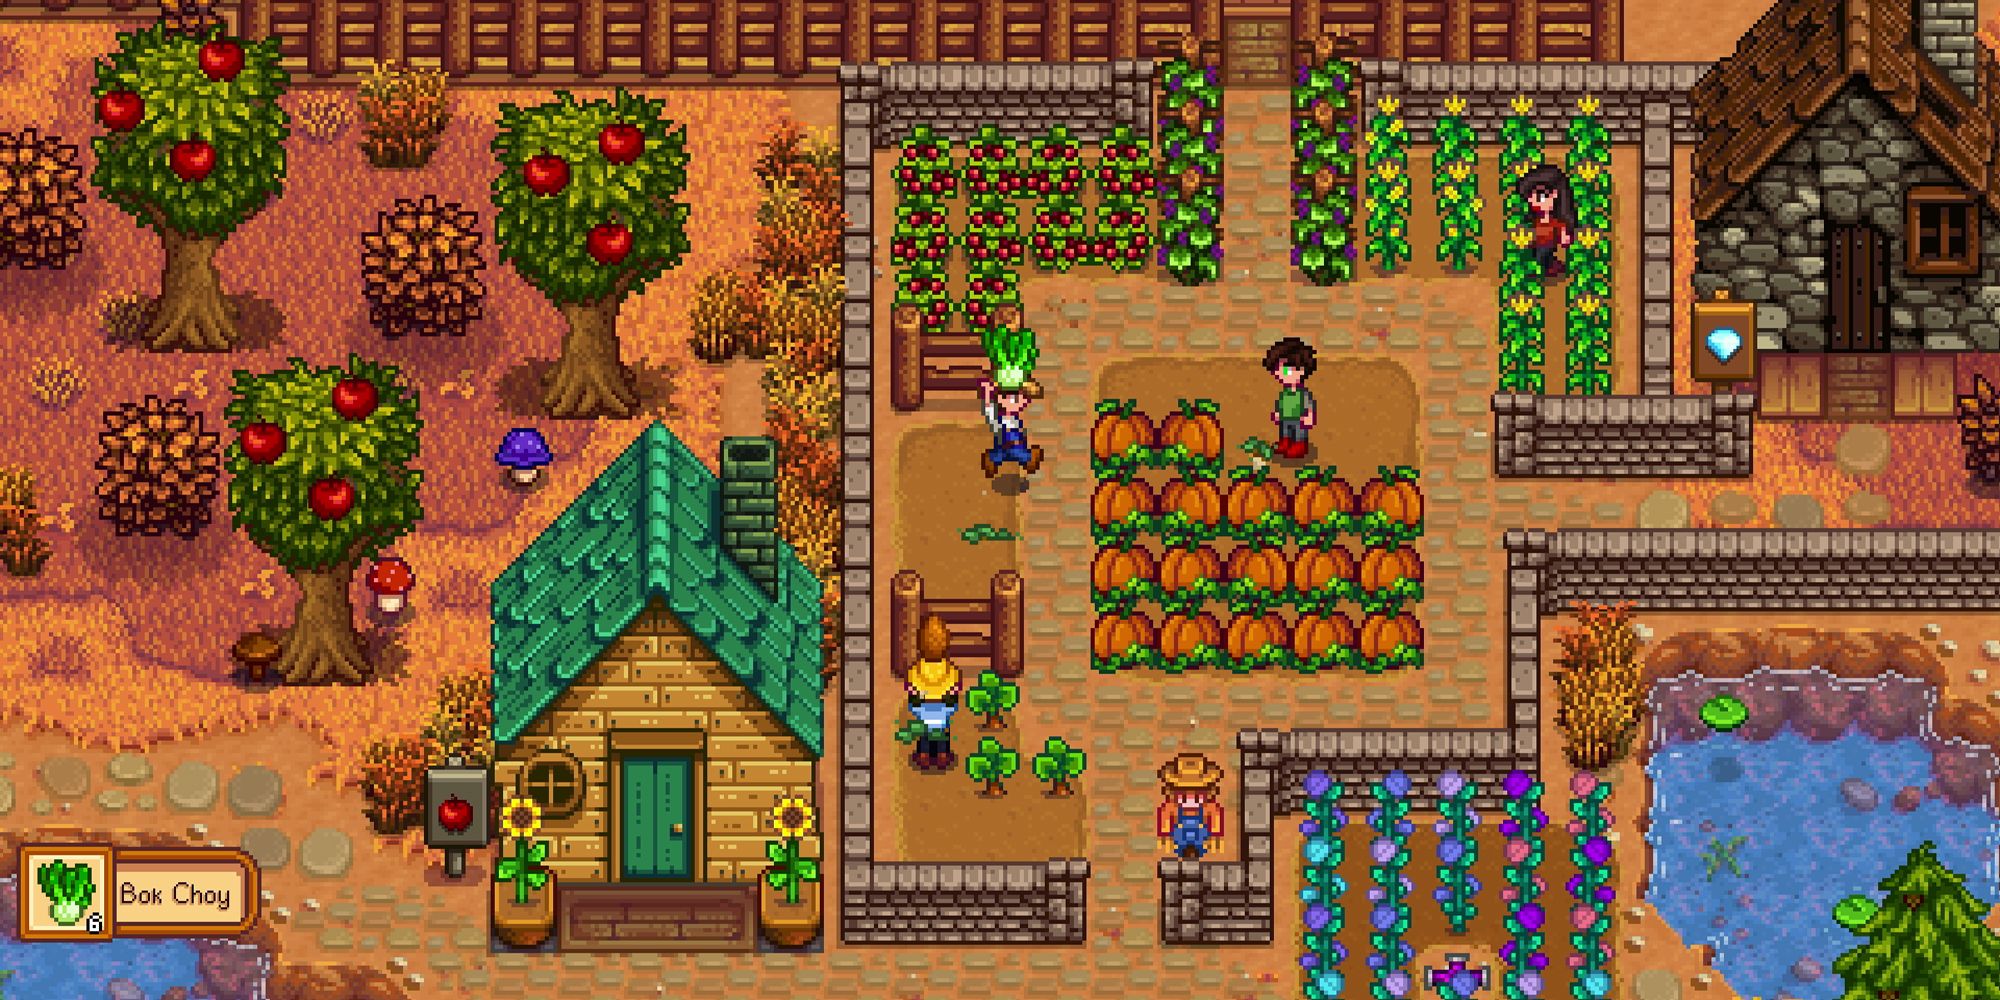 Stardew Valley multiplayer screenshot of player carrying Bok Choy